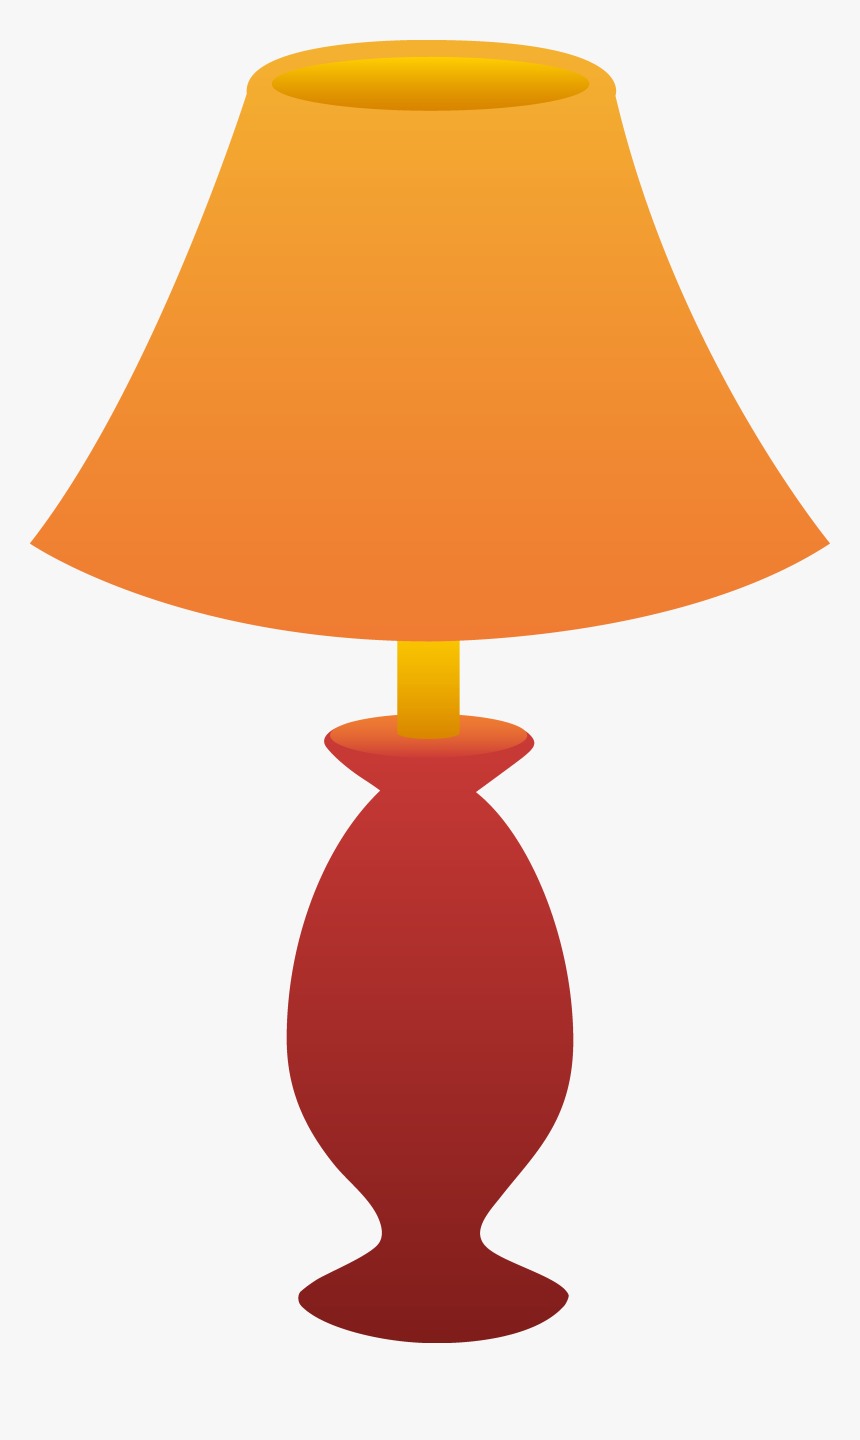 Red Table Lamp - Lamps Clipart, HD Png Download, Free Download